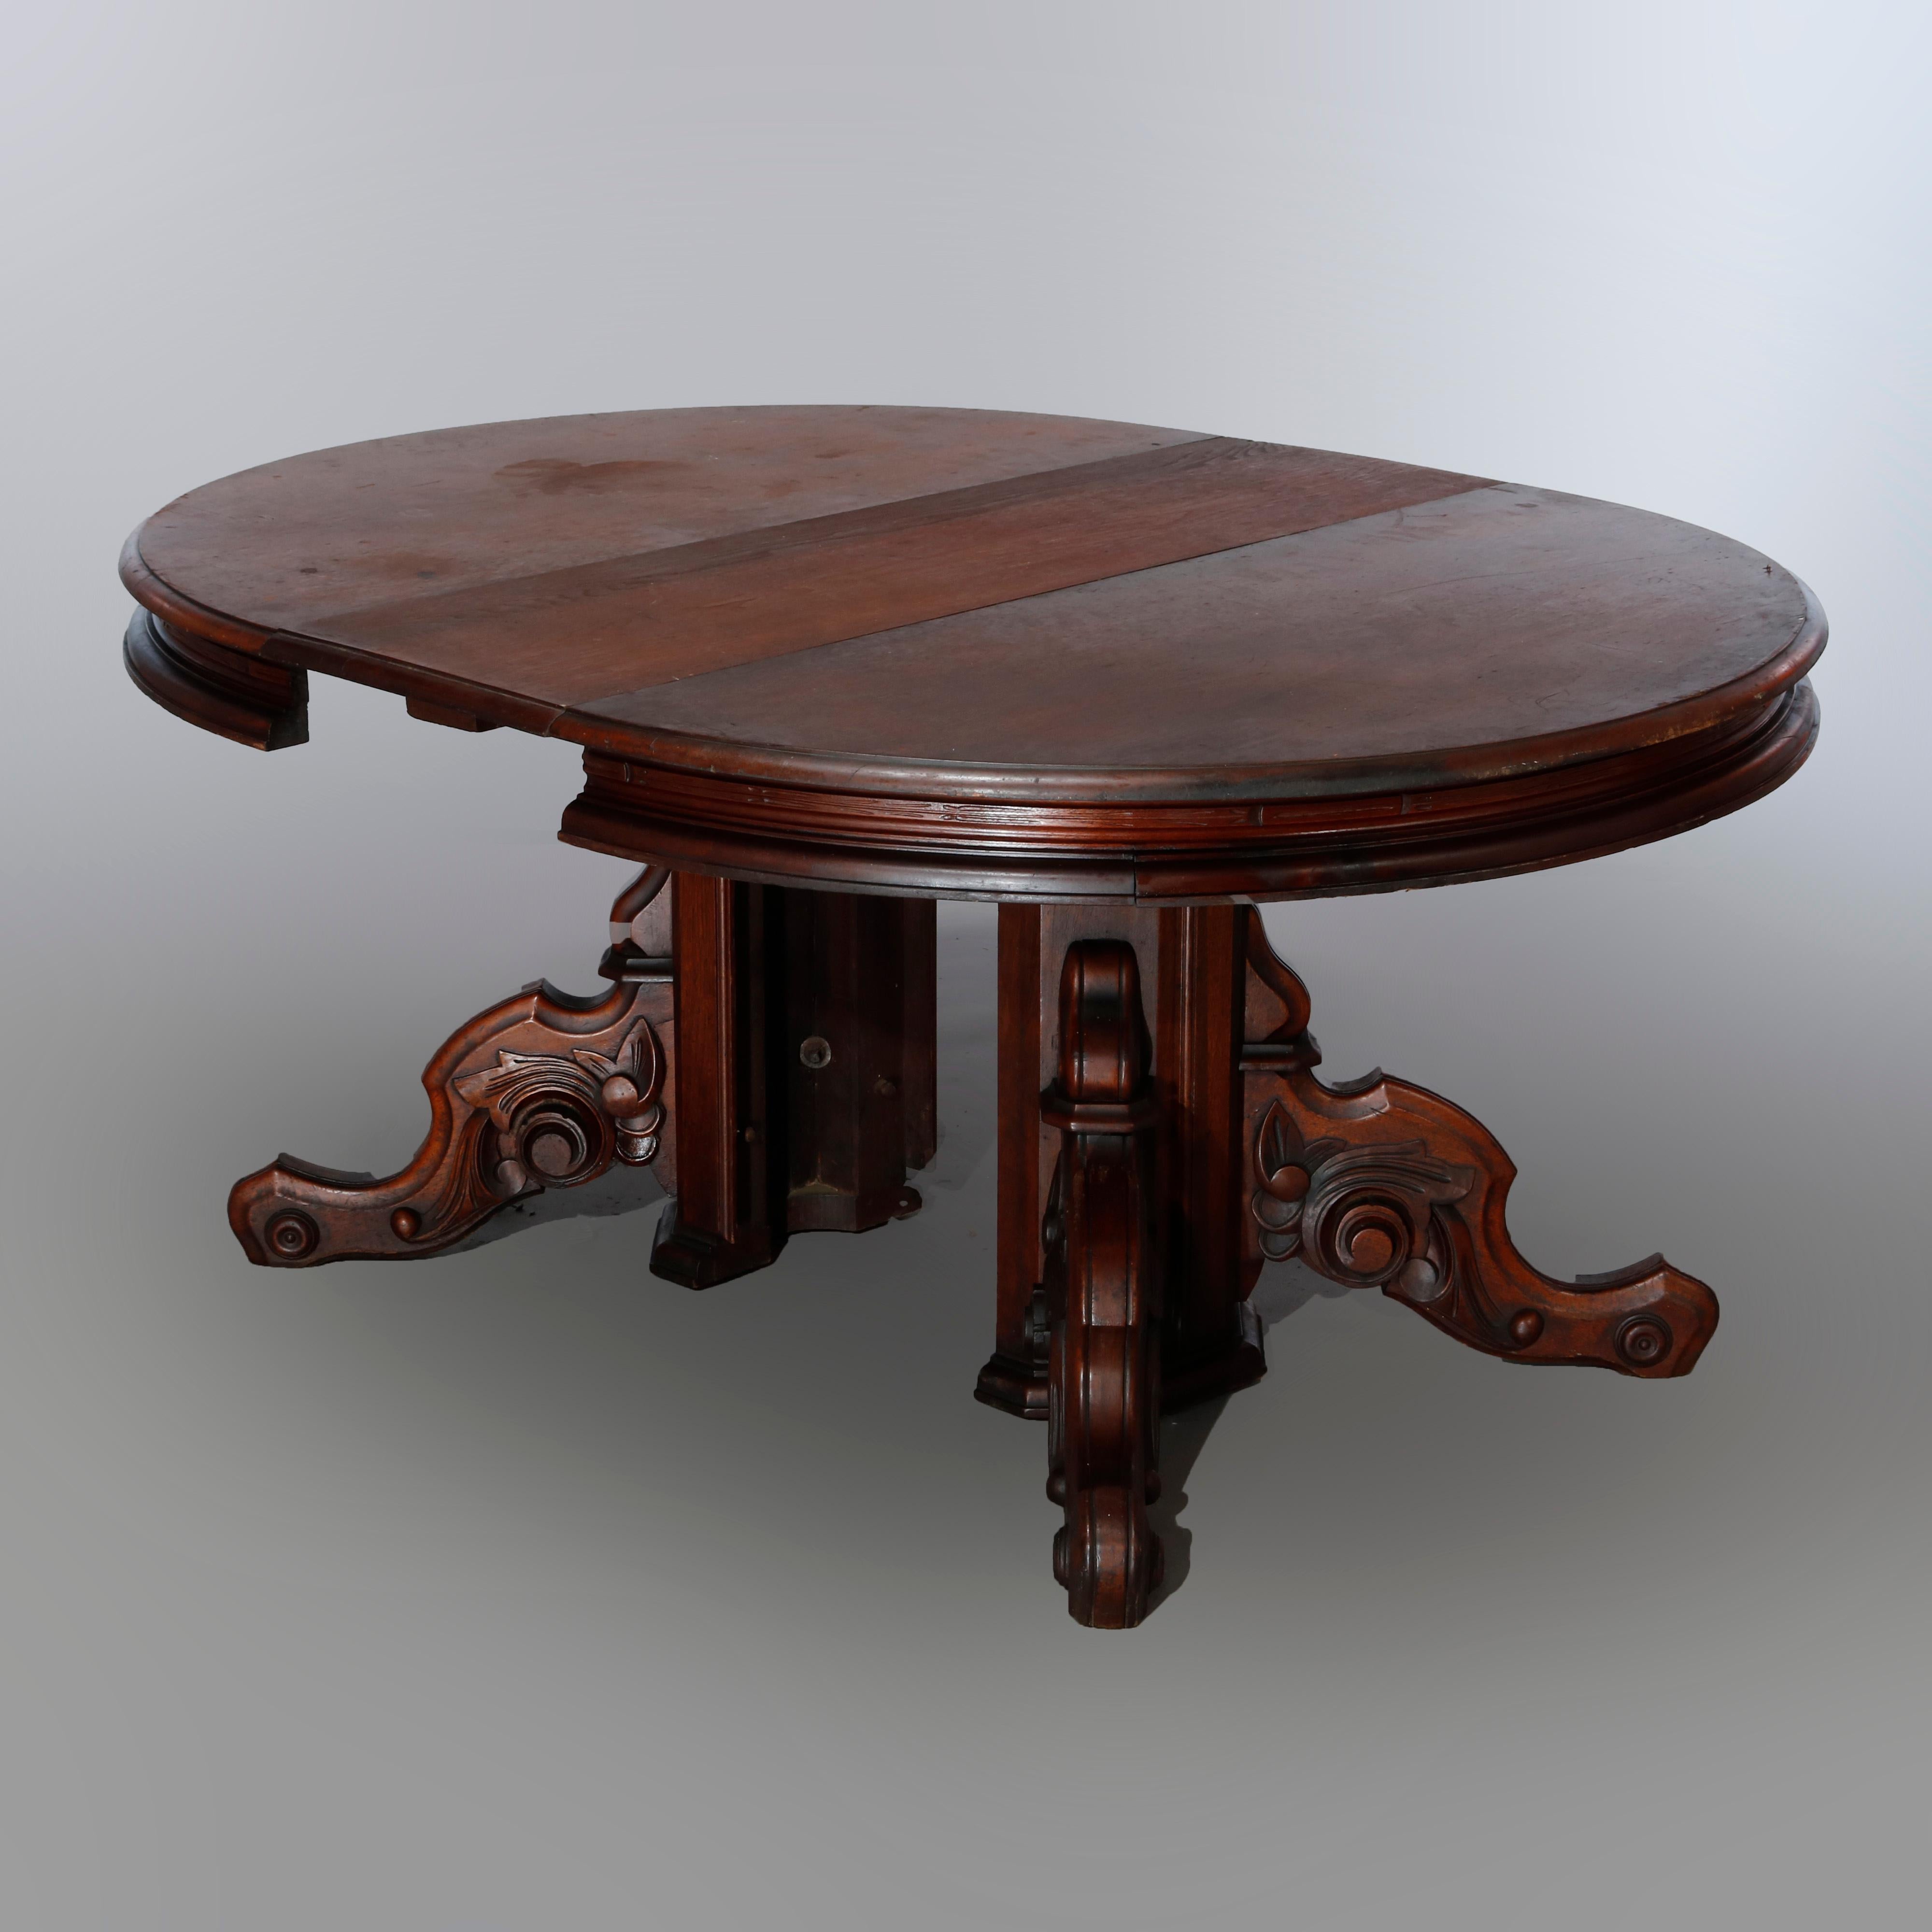 Wood Antique Renaissance Revival Carved Walnut Extension Dining Table & Leaves, c1880